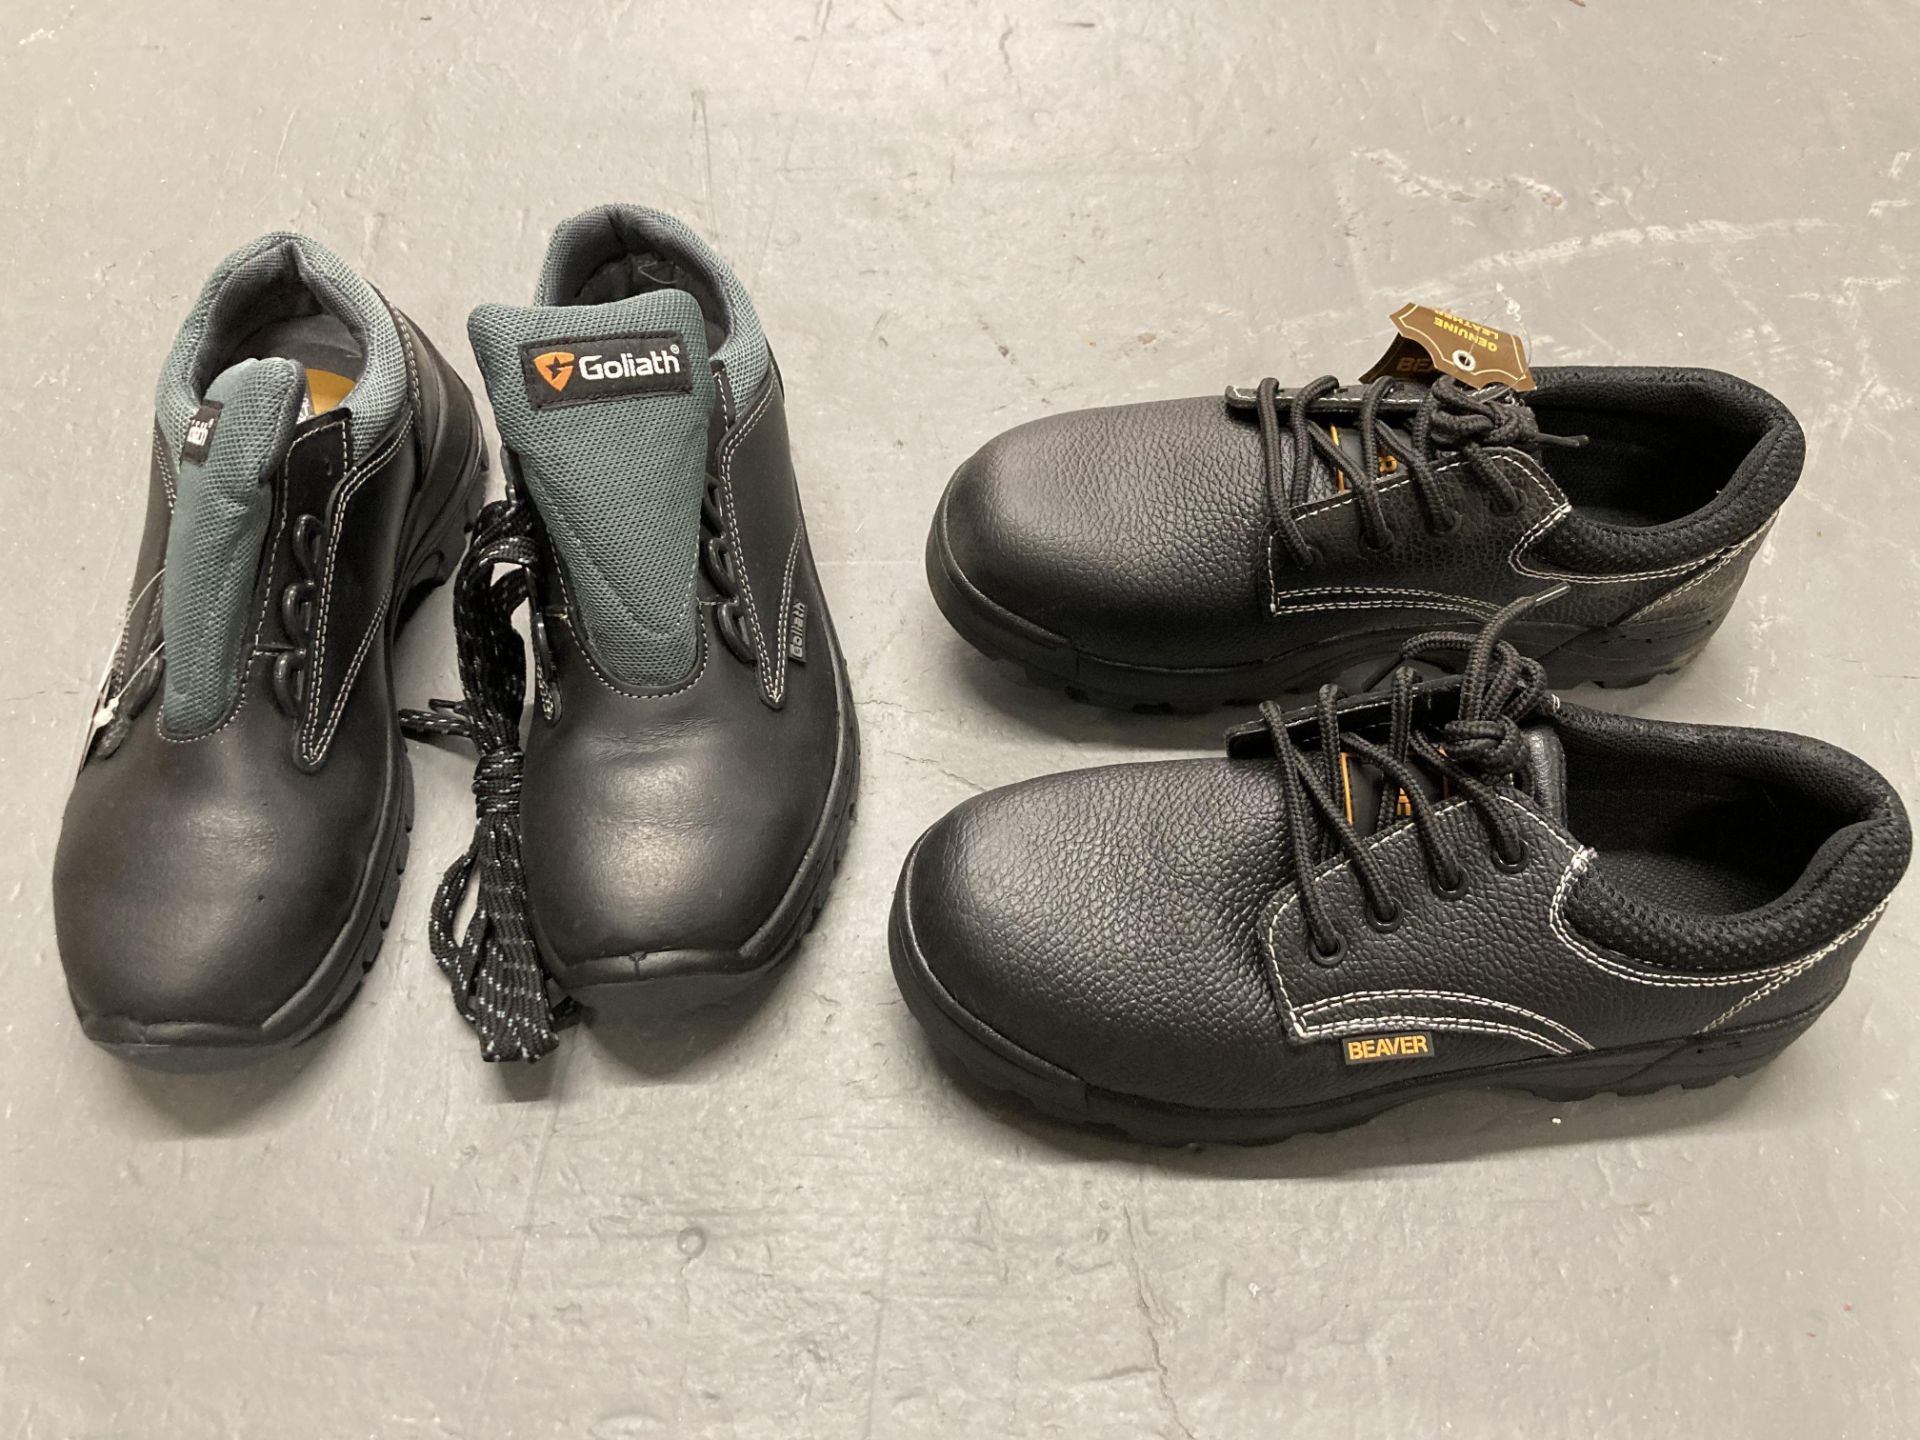 Nine pairs of work shoes, Grafter, Goliath and Beaver safety shoes, sizes various.